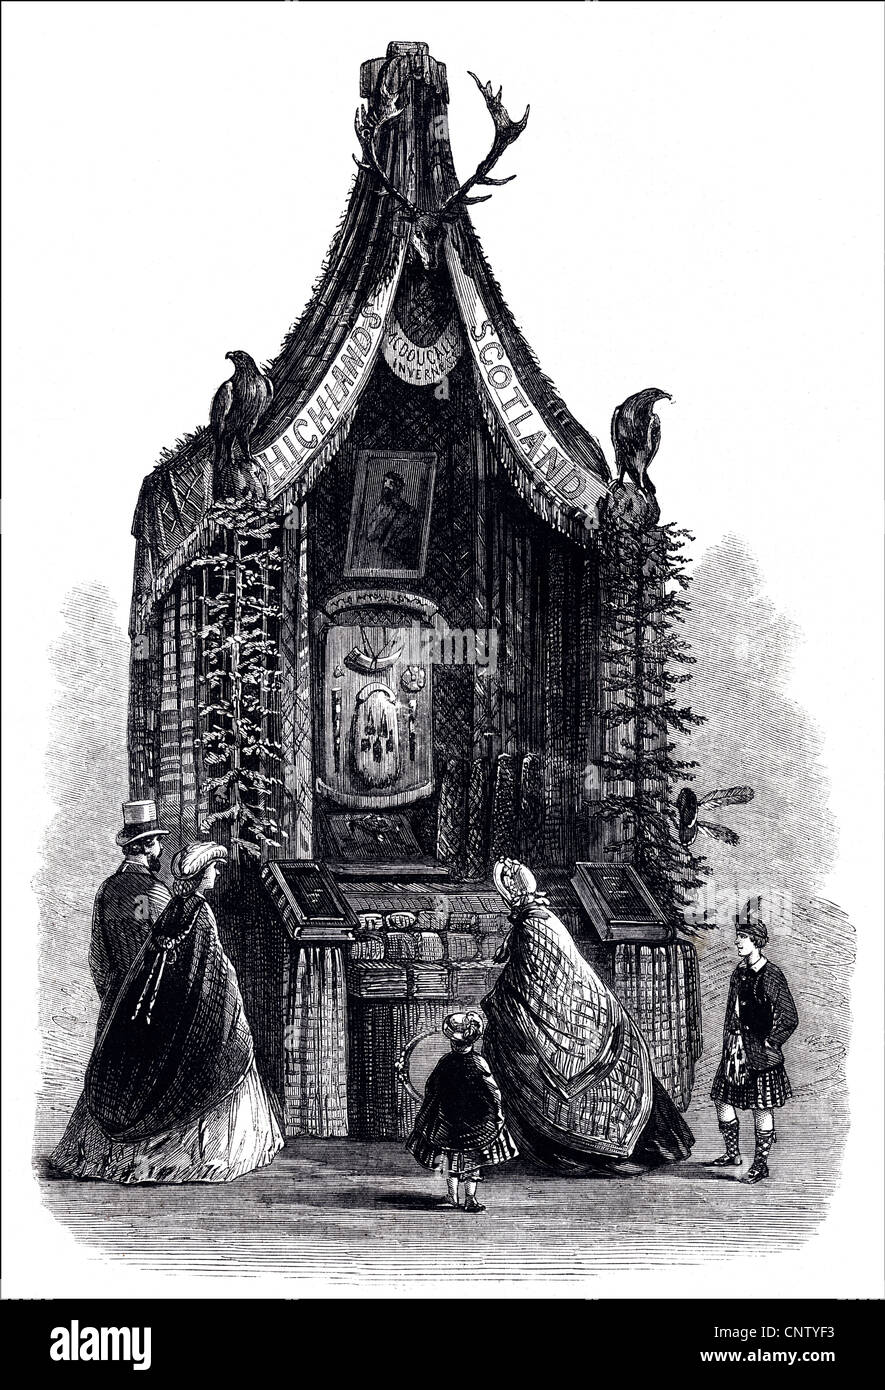 McDougall's stall - The Highlands of Scotland exhibited at The International Exhibition South Kensington London. Victorian engraving dated 12th July 1862 Stock Photo